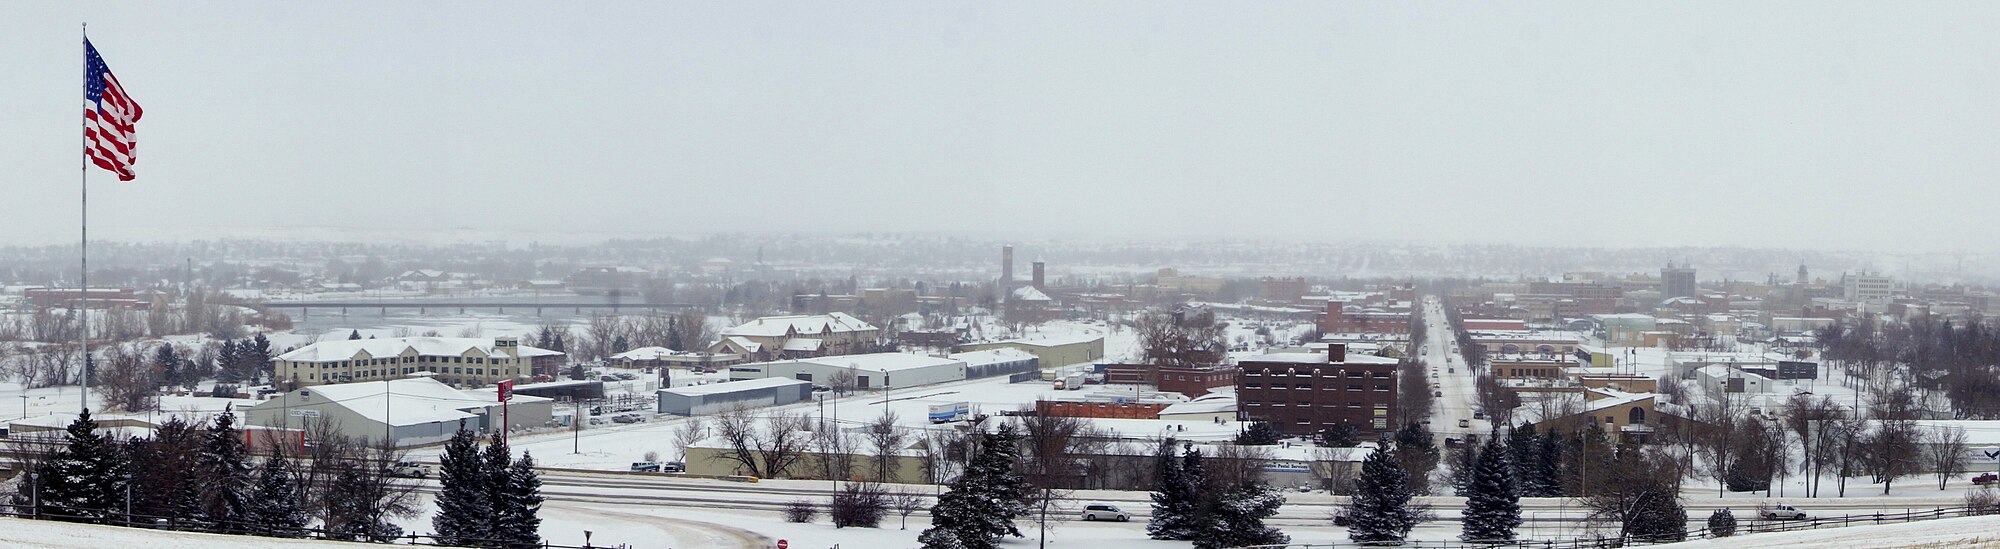 Great Falls in the winter. The Missouri river and Flag Hill are pictured leftmost with the downtown area to the right.